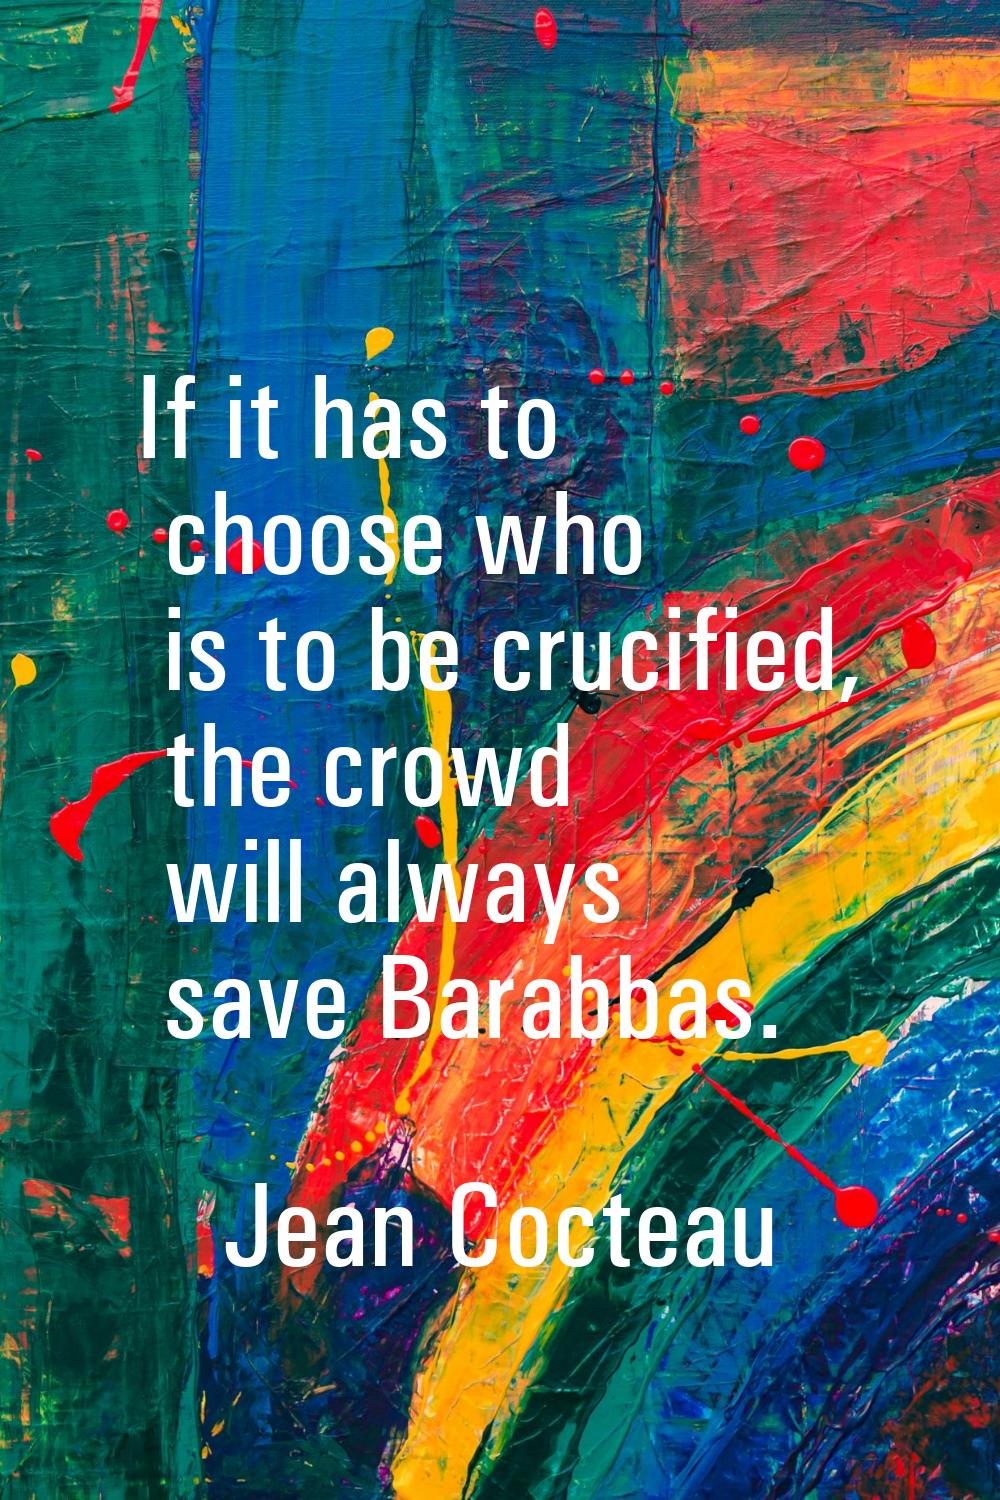 If it has to choose who is to be crucified, the crowd will always save Barabbas.